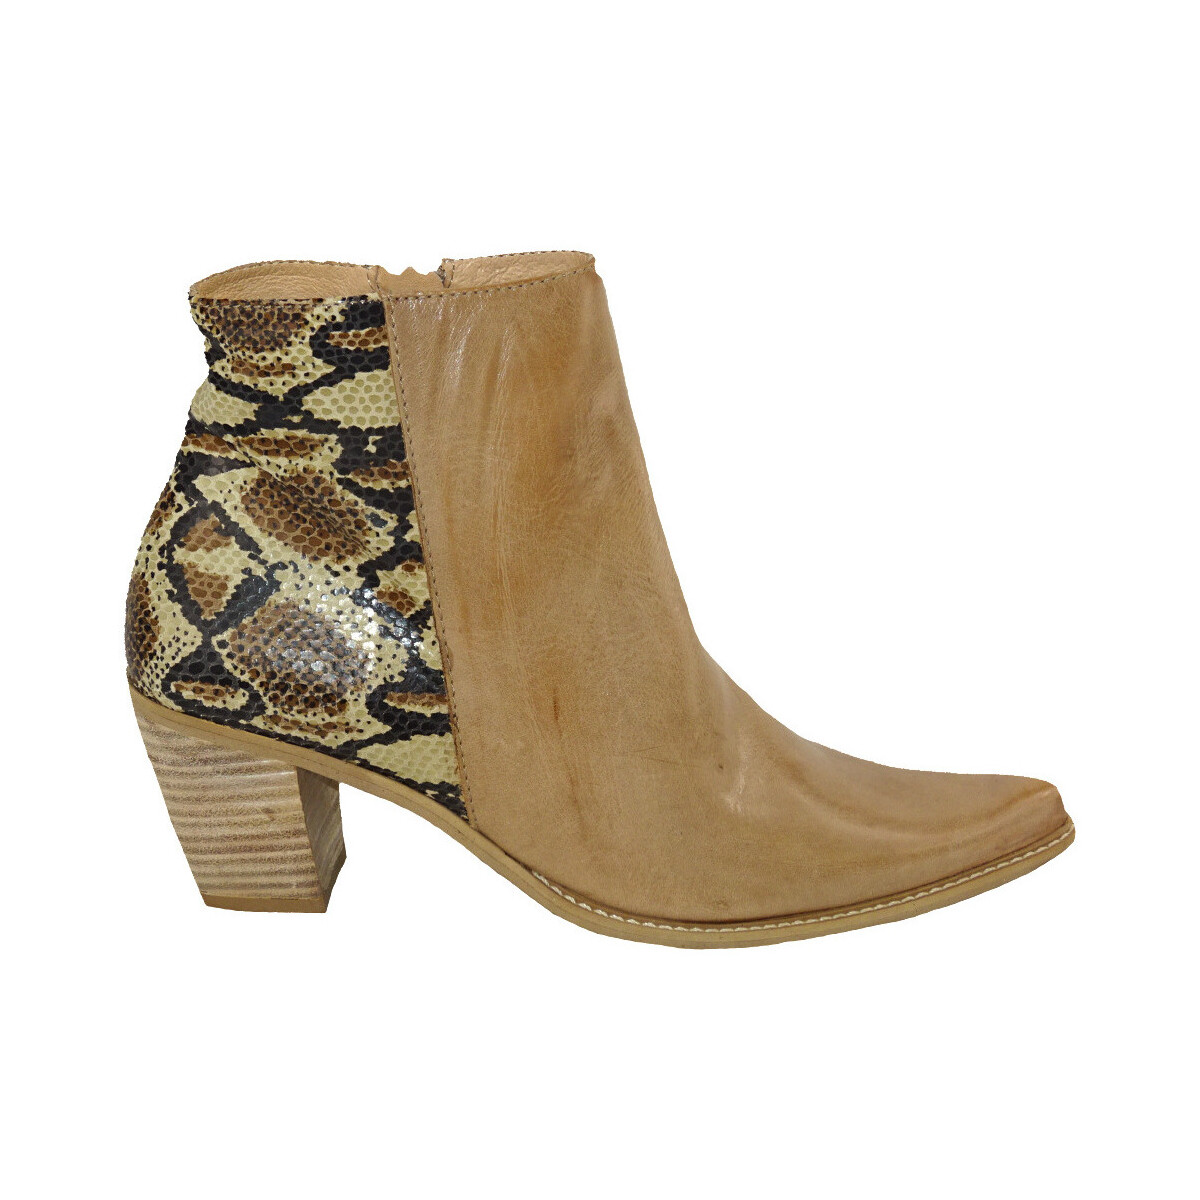 Chaussures Femme Boots PintoDiBlu PINTO23 Beige